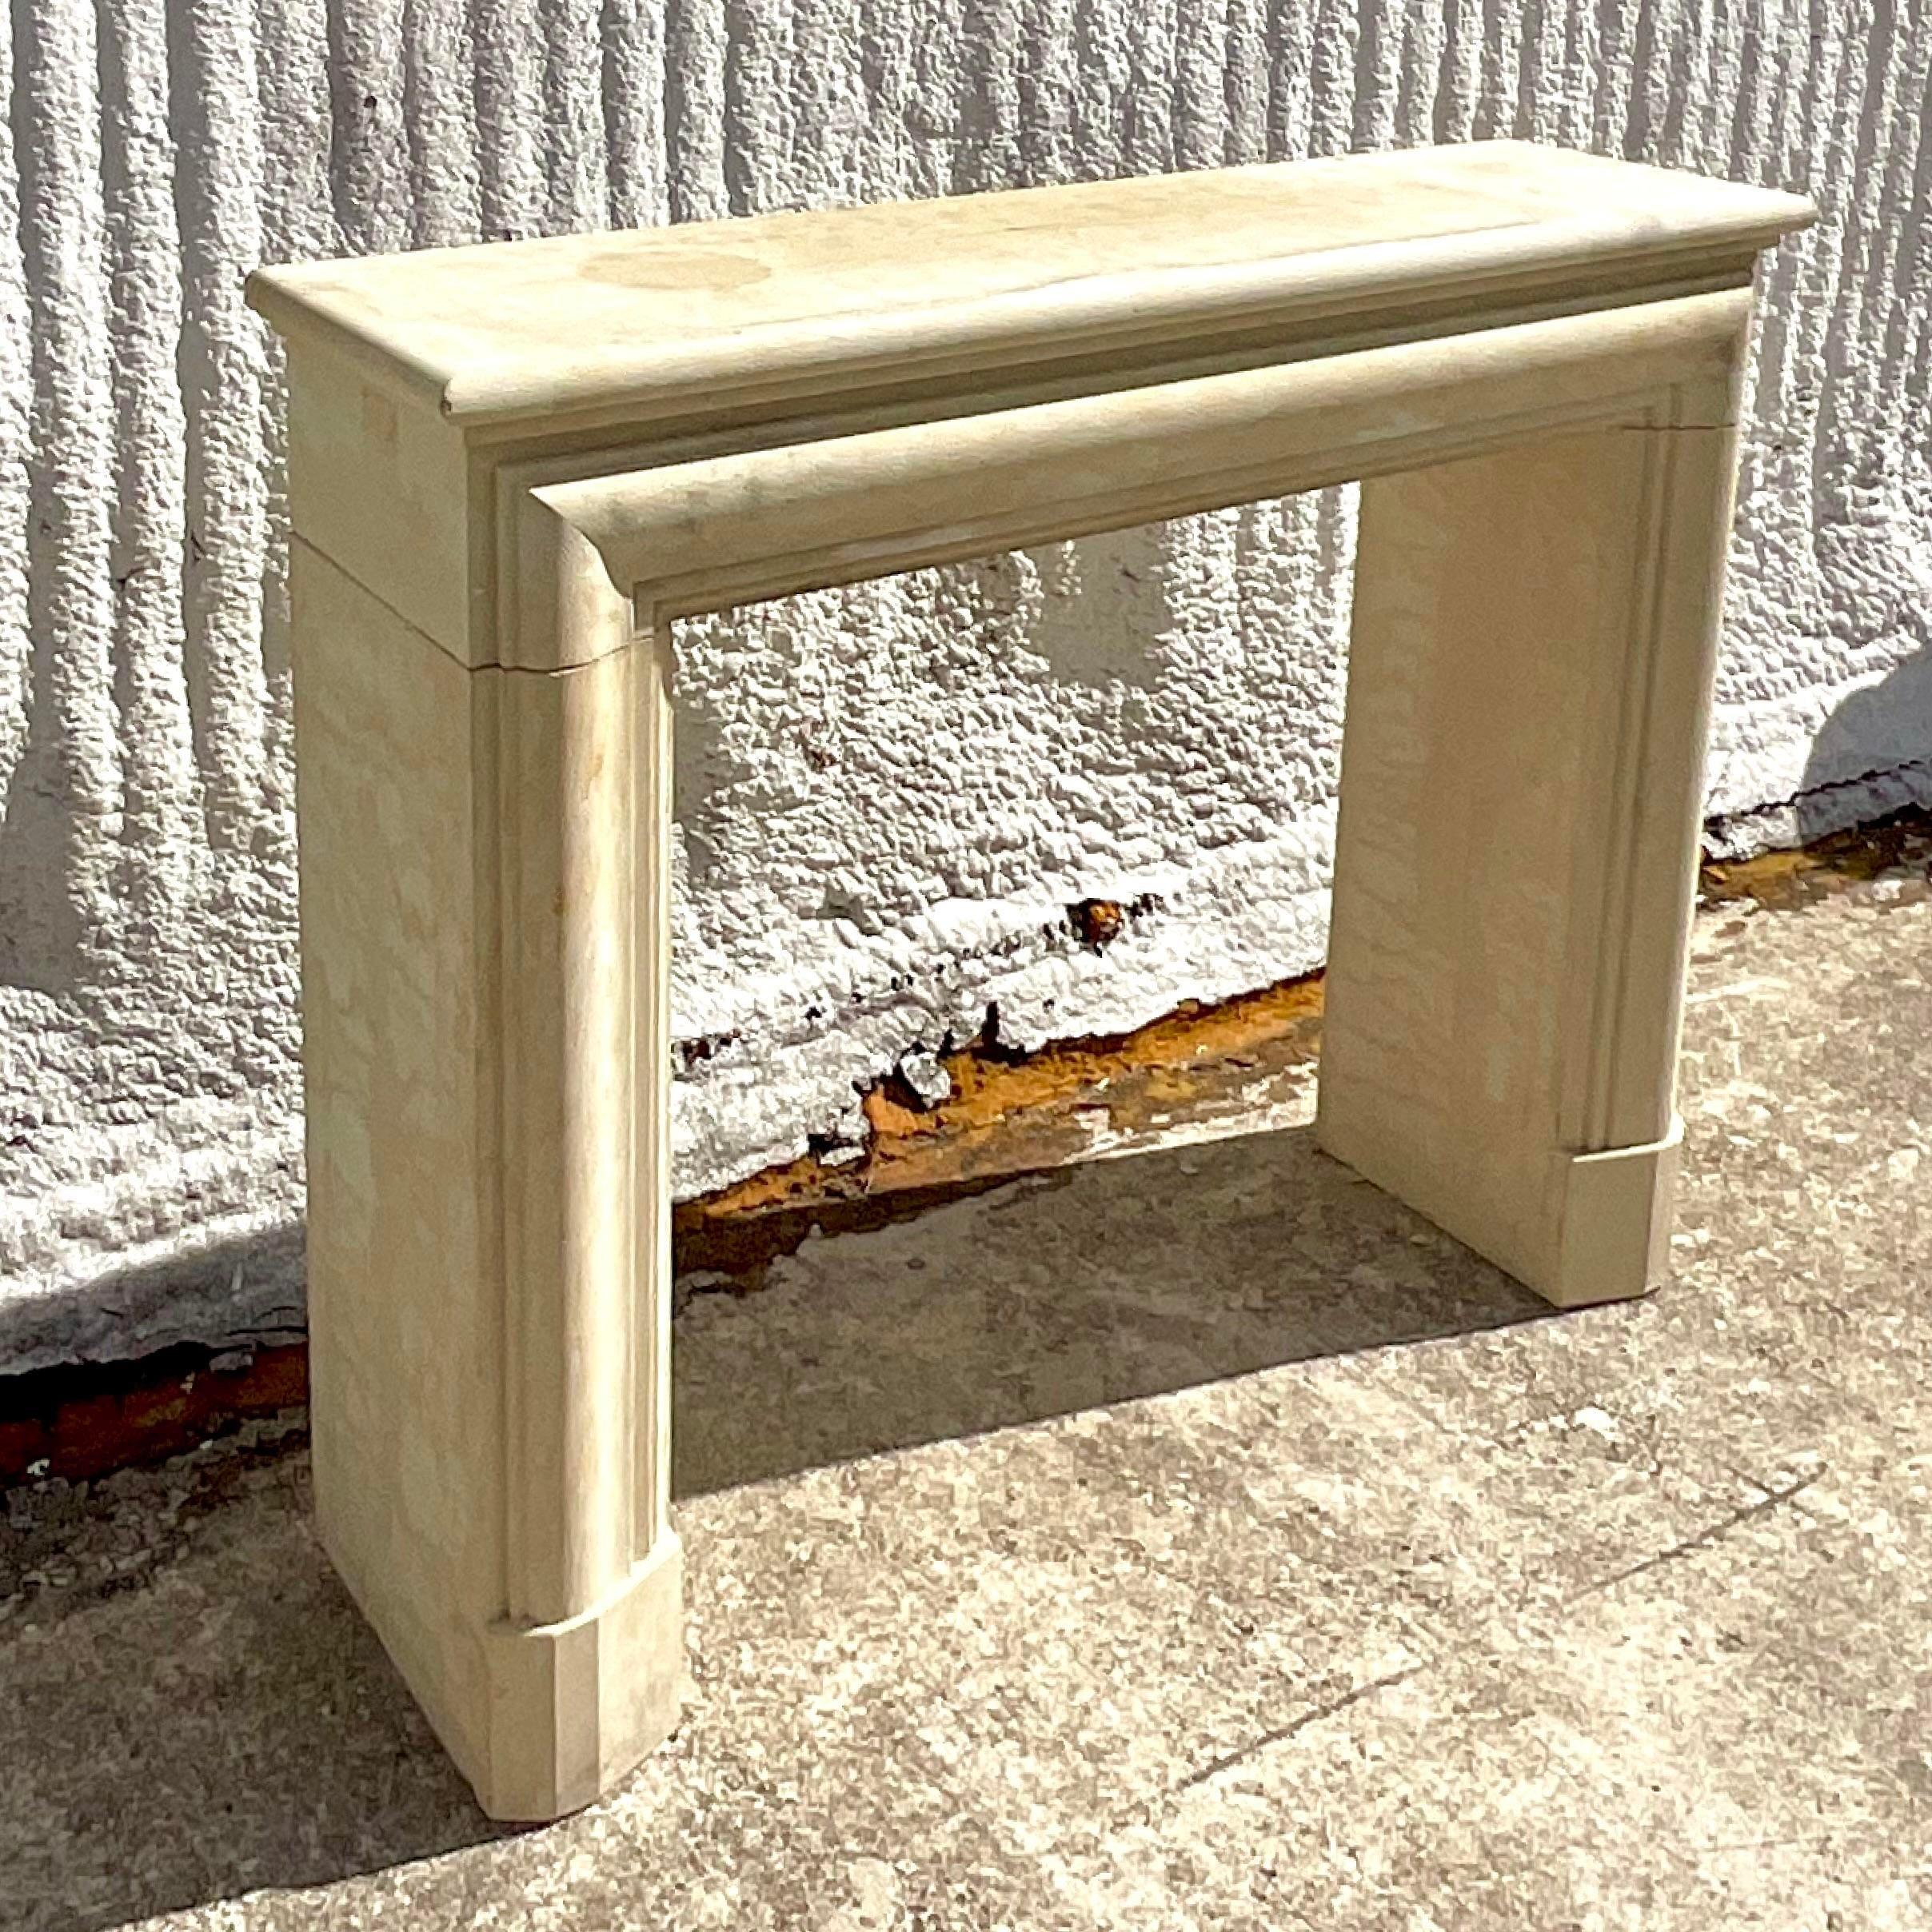 An exceptional vintage Contemporary limestone fireplace mantle. Made by the iconic Authentic Provence. Clean lines and solid dimensions make this a timeless classic. Perched by the designer and never installed. A great opportunity to get a major